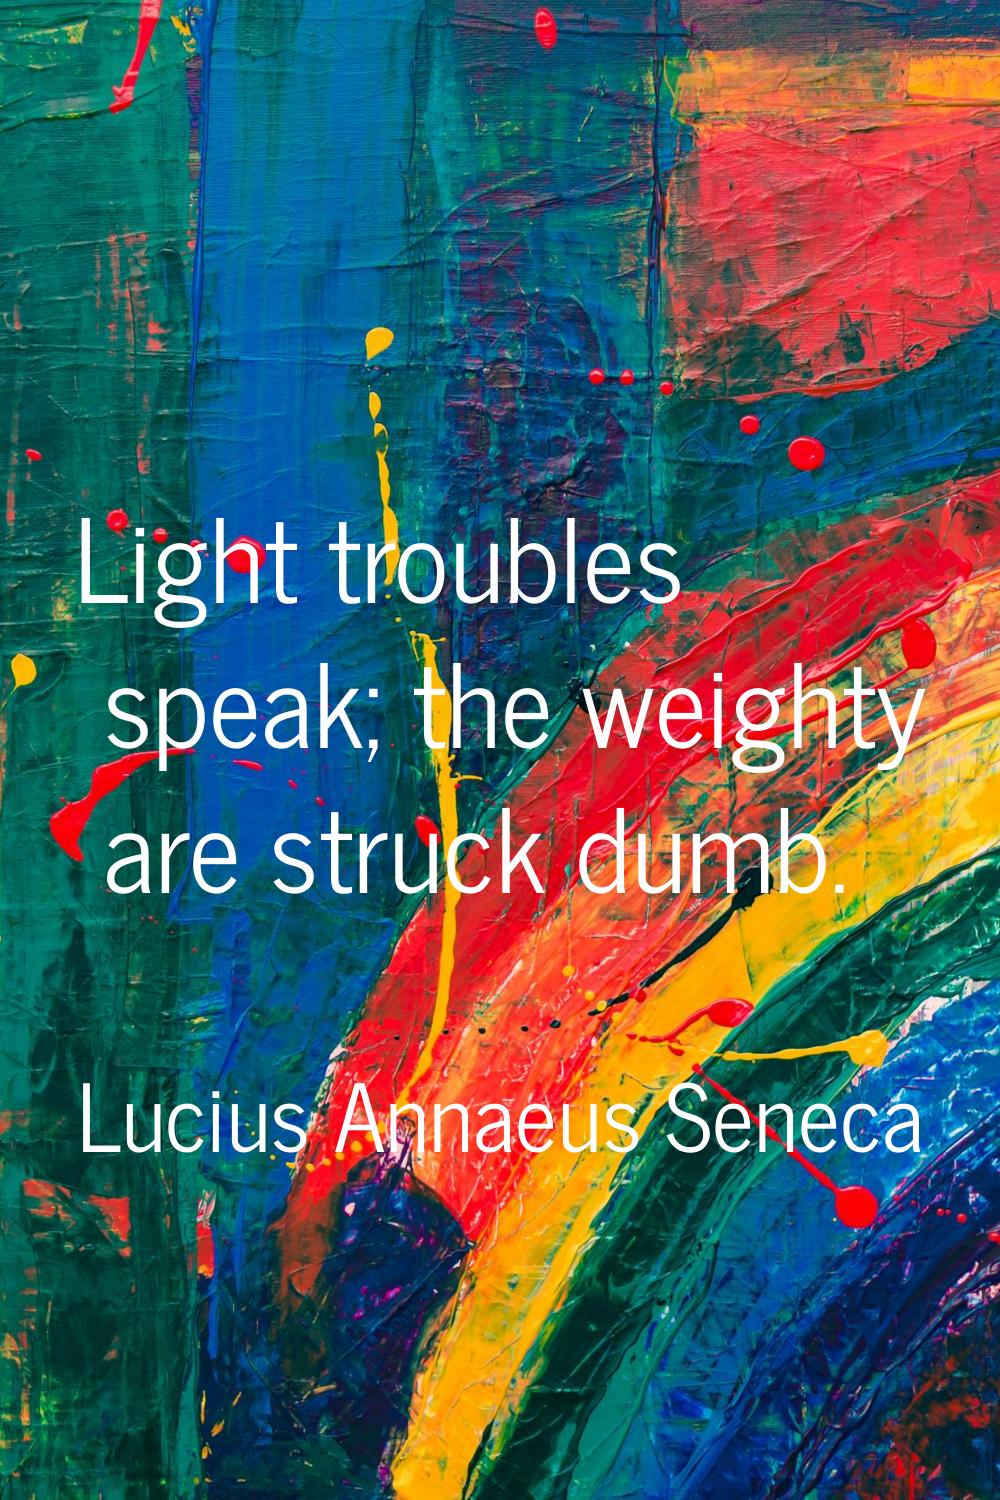 Light troubles speak; the weighty are struck dumb.